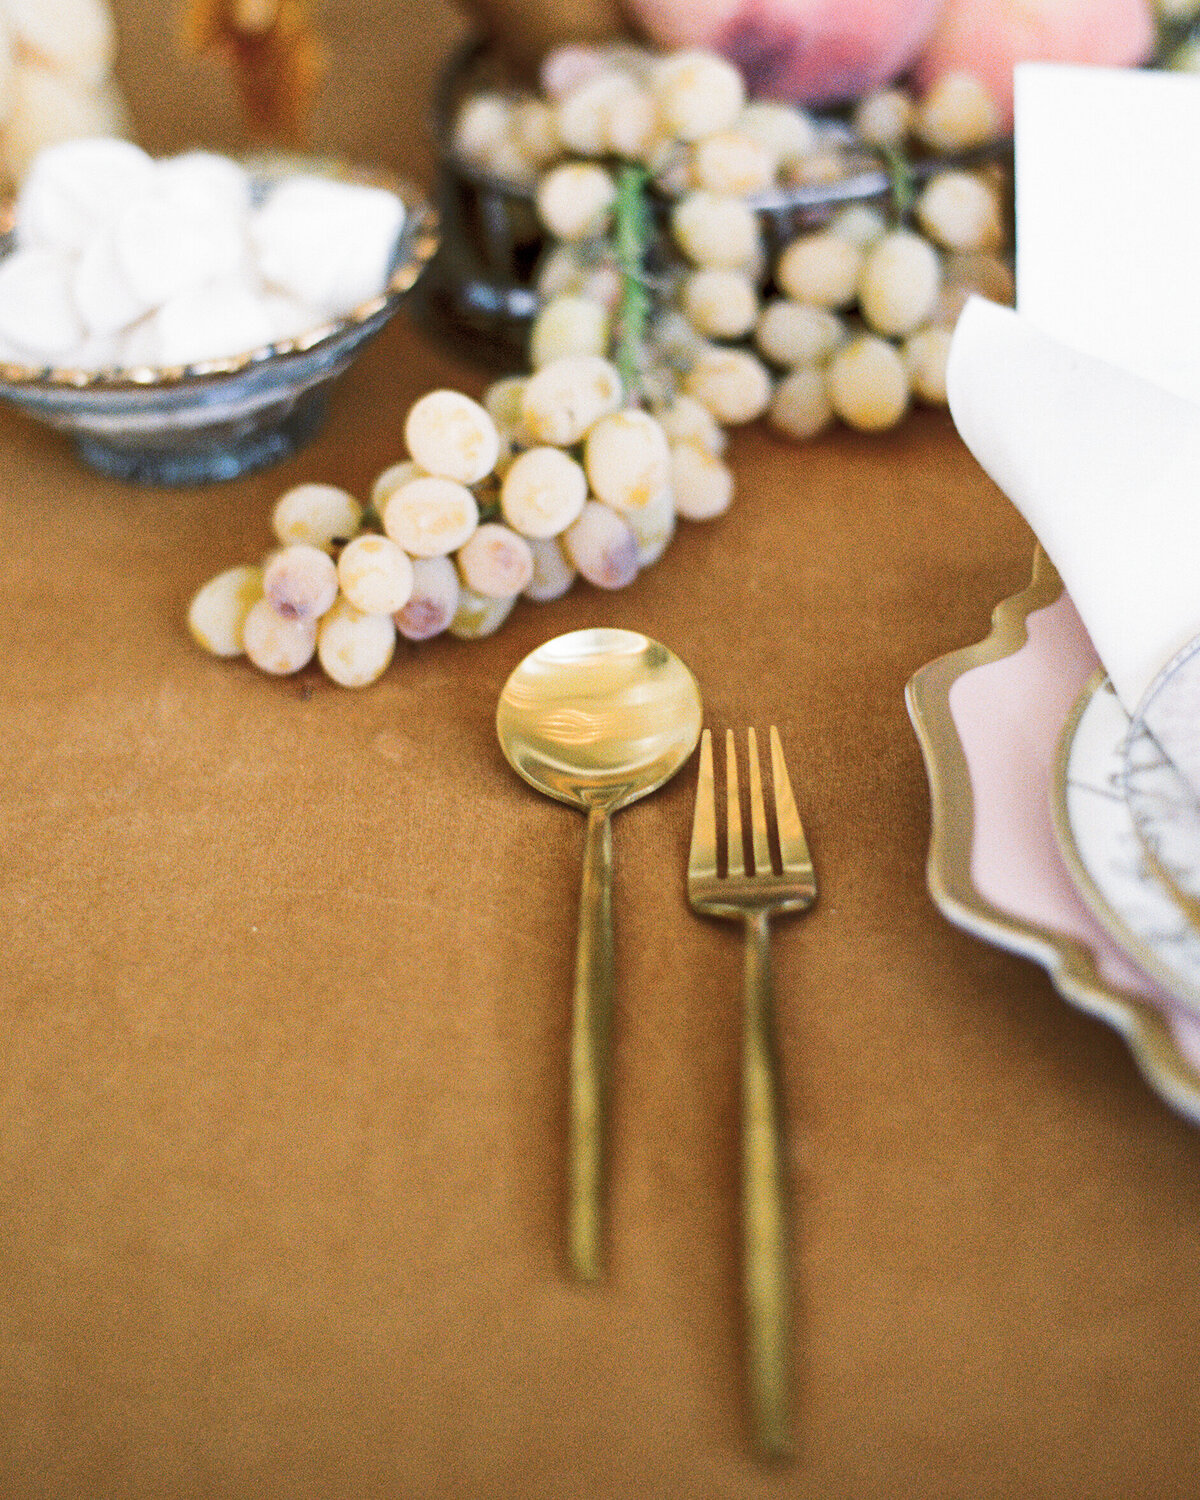 Gold silverware on table